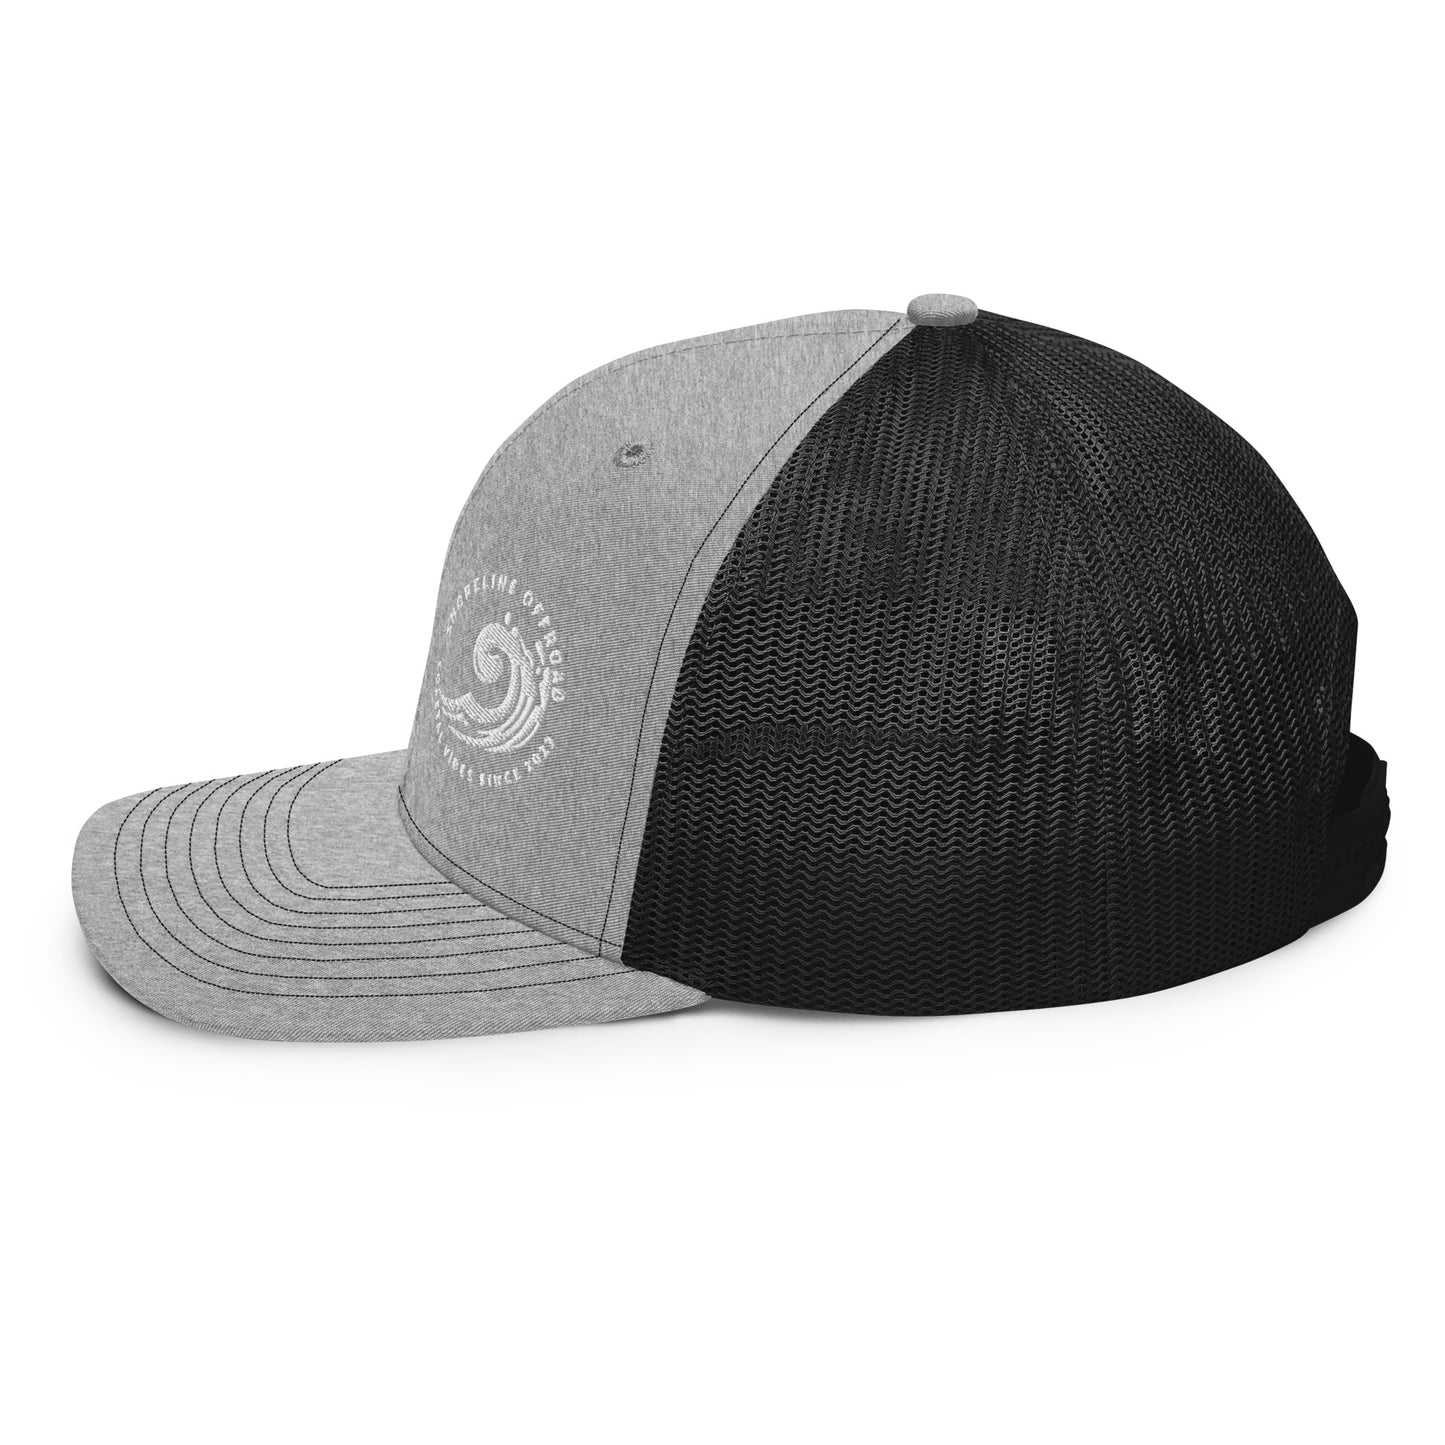 a black and grey hat on a white background